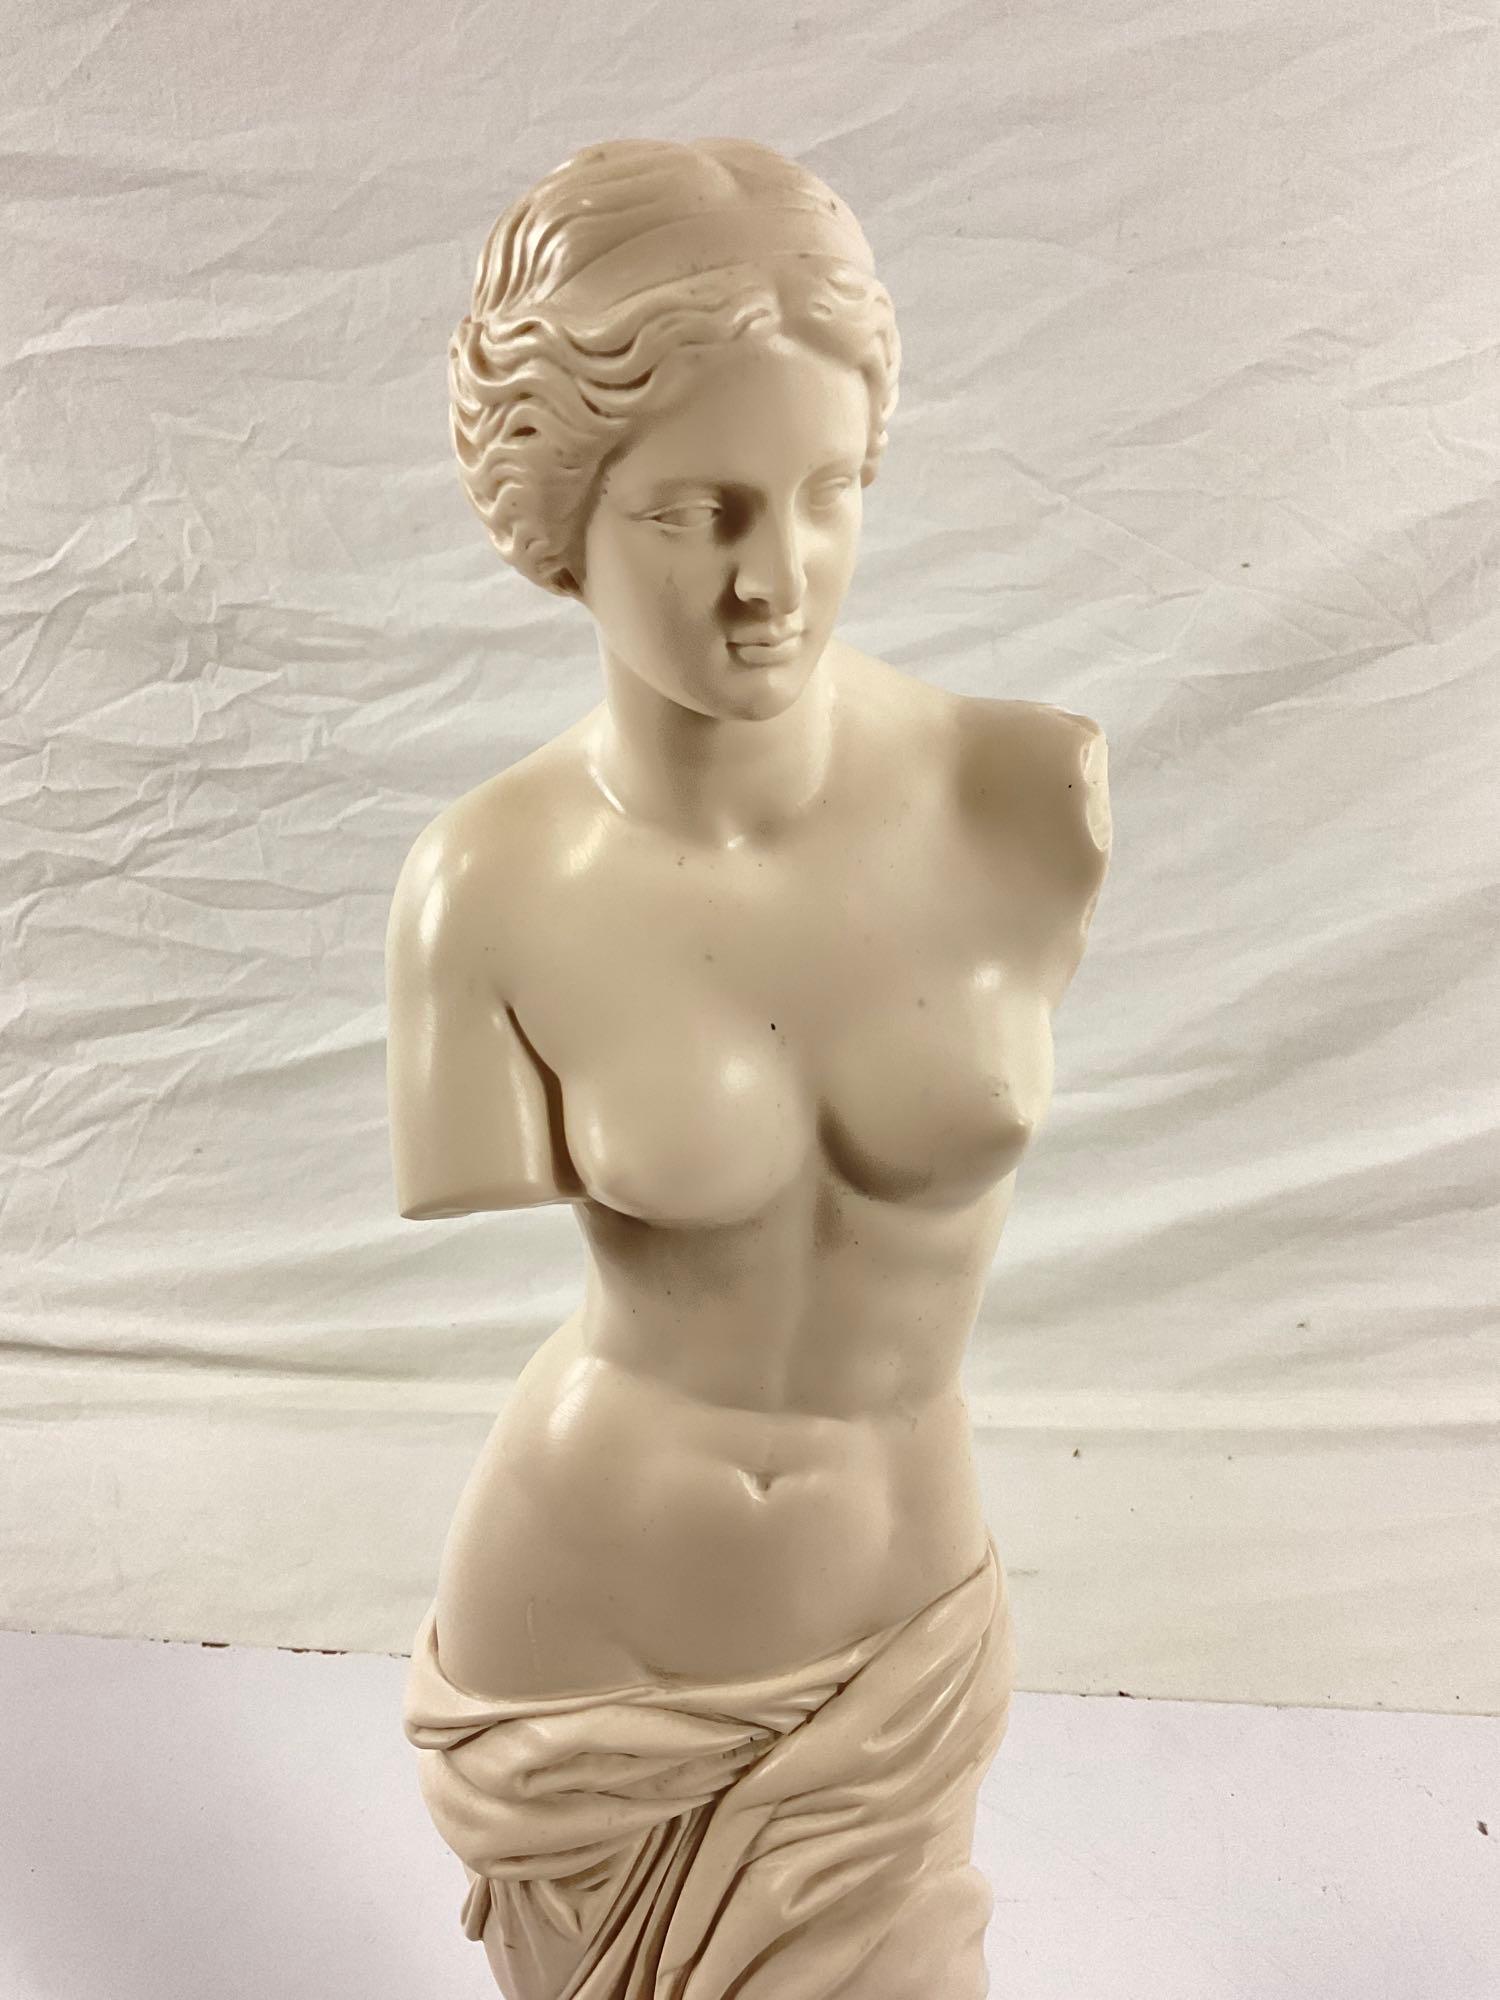 Beautiful Venus De Milo stone sculpture made & purchased in Italy 1970, 11 3/4? tall